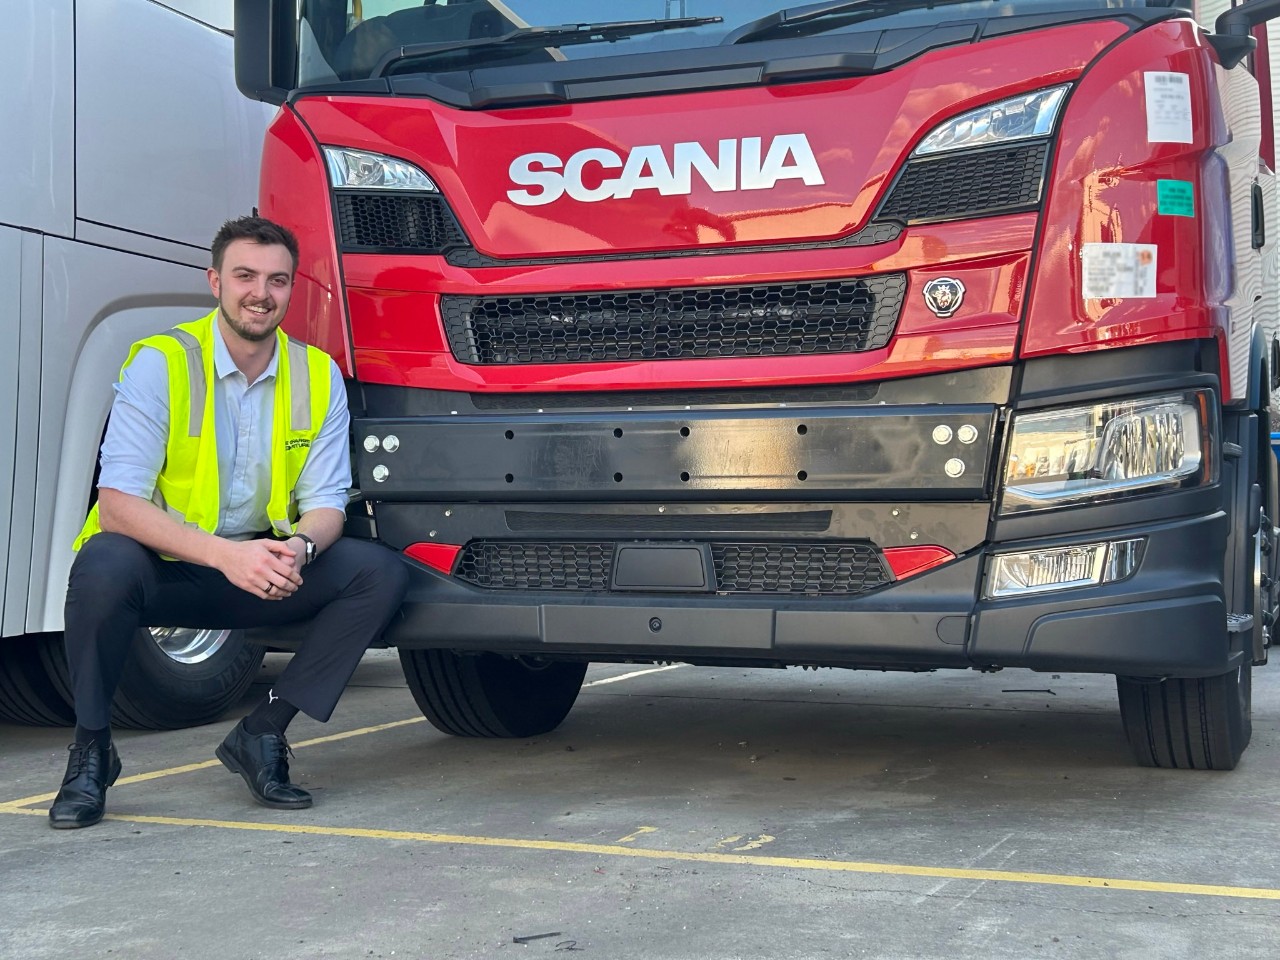 Scania raises the bar for emergency services vehicles